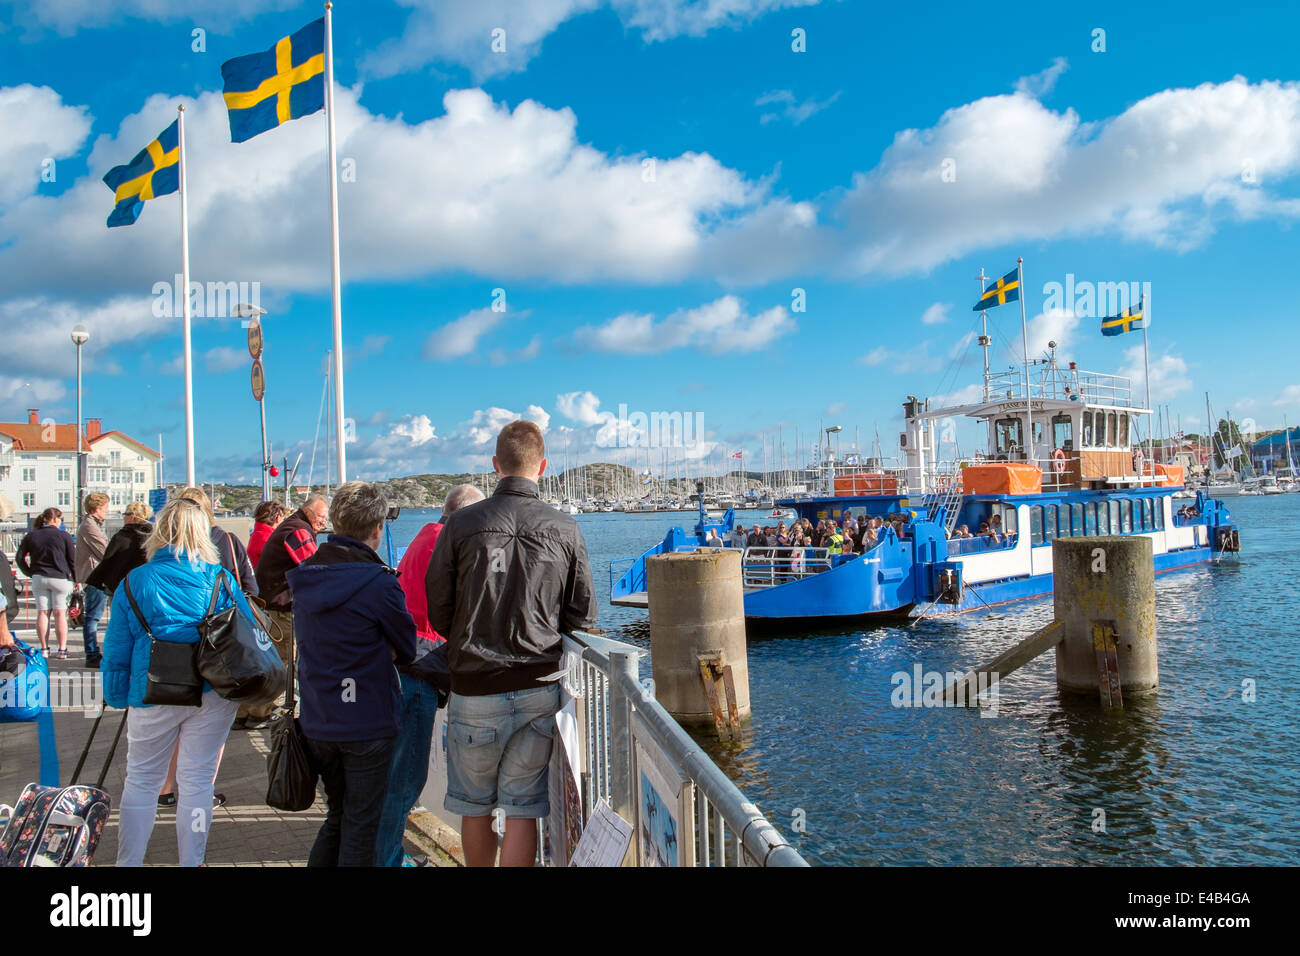 Tourists wait for the ferry that connects the two islands on which Marstrand is located Stock Photo